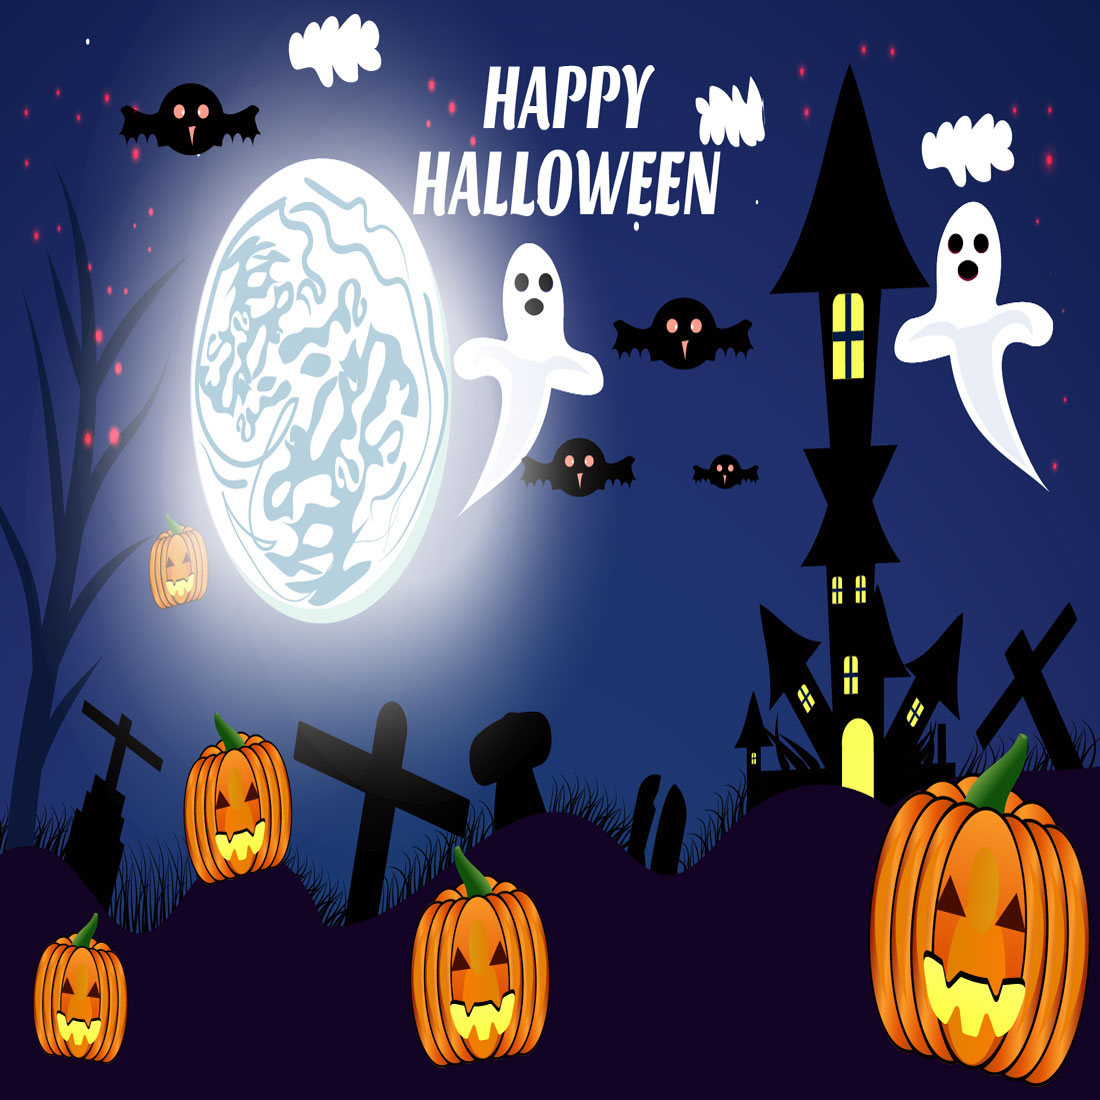 Halloween Night with pumpkins & full Moon Vector illustration preview image.